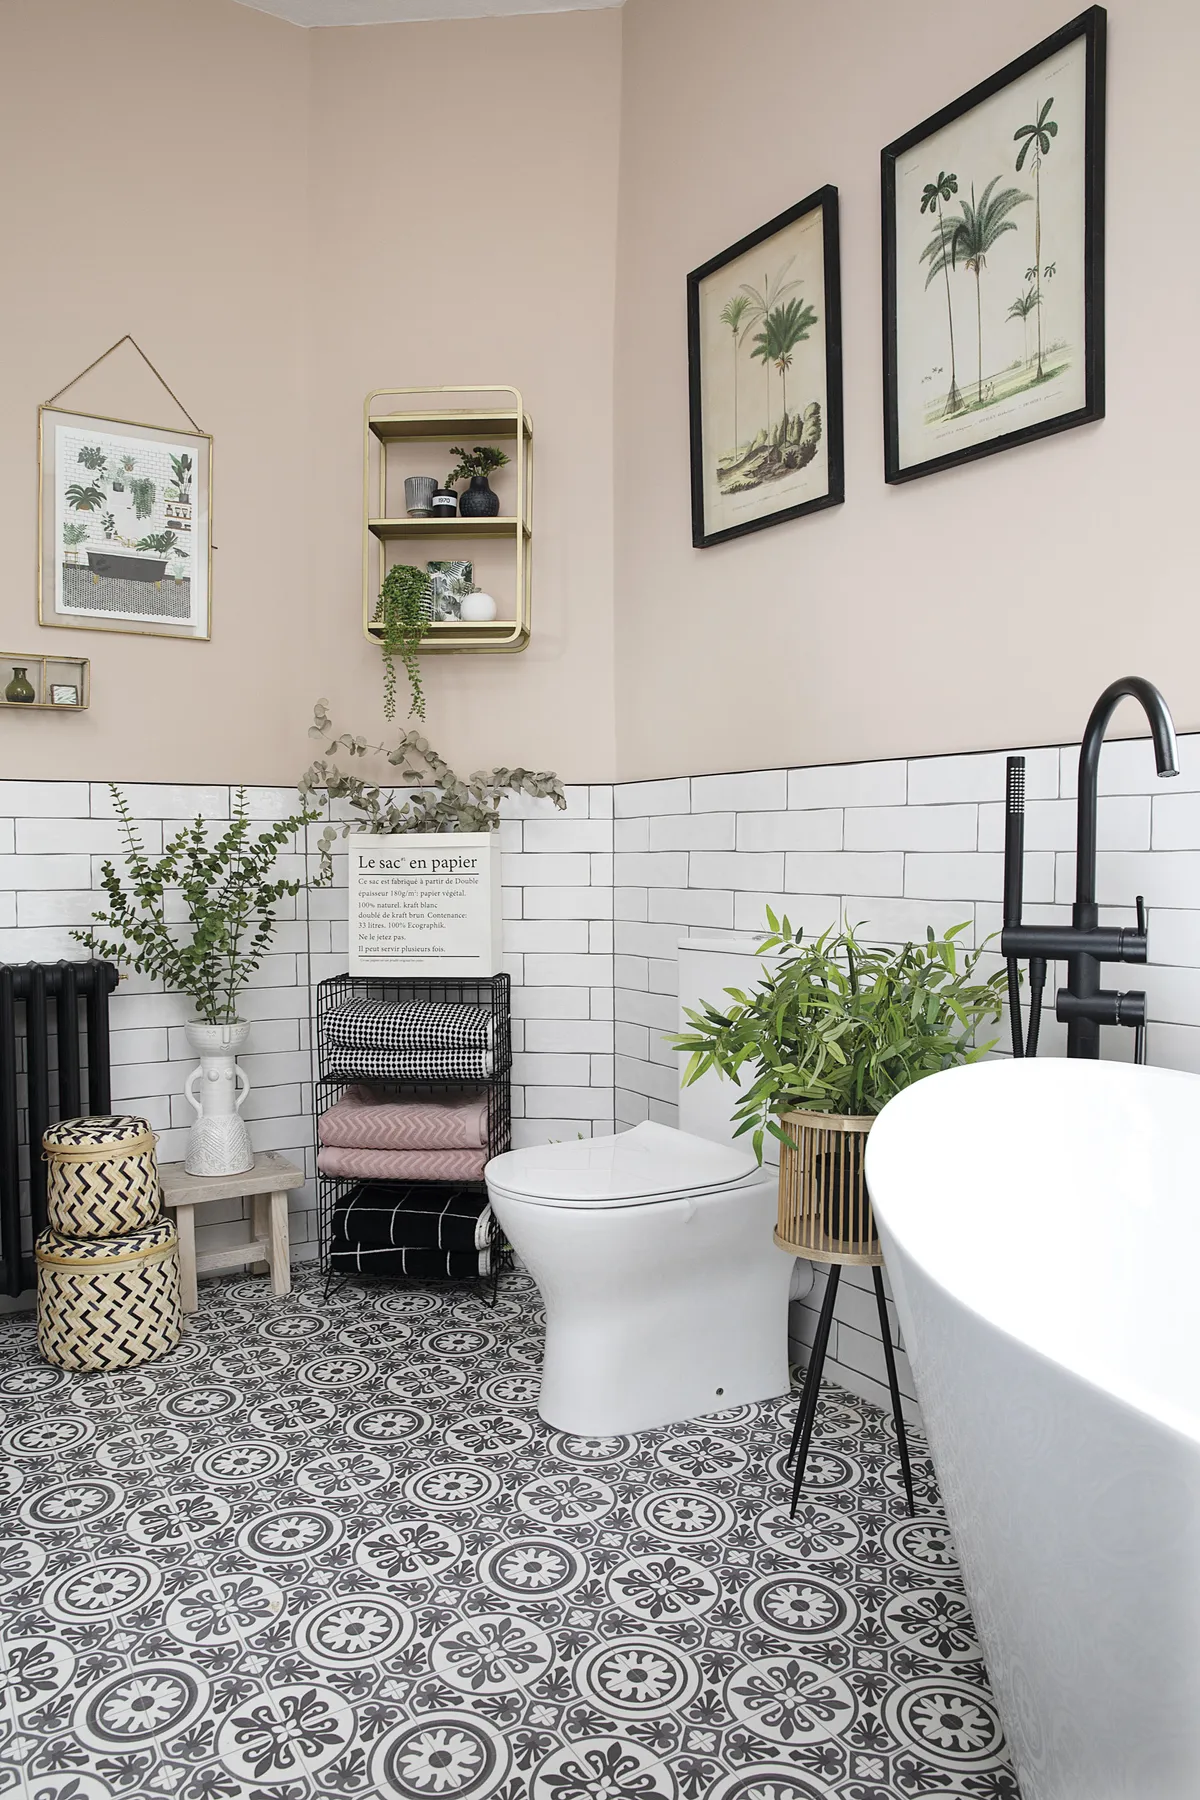 Although they toyed with putting the vanity unit in this angled corner, the couple felt it would work better on the opposite wall. Instead, they’ve moved the toilet further away from the bath and added a black mesh rack for storing towels